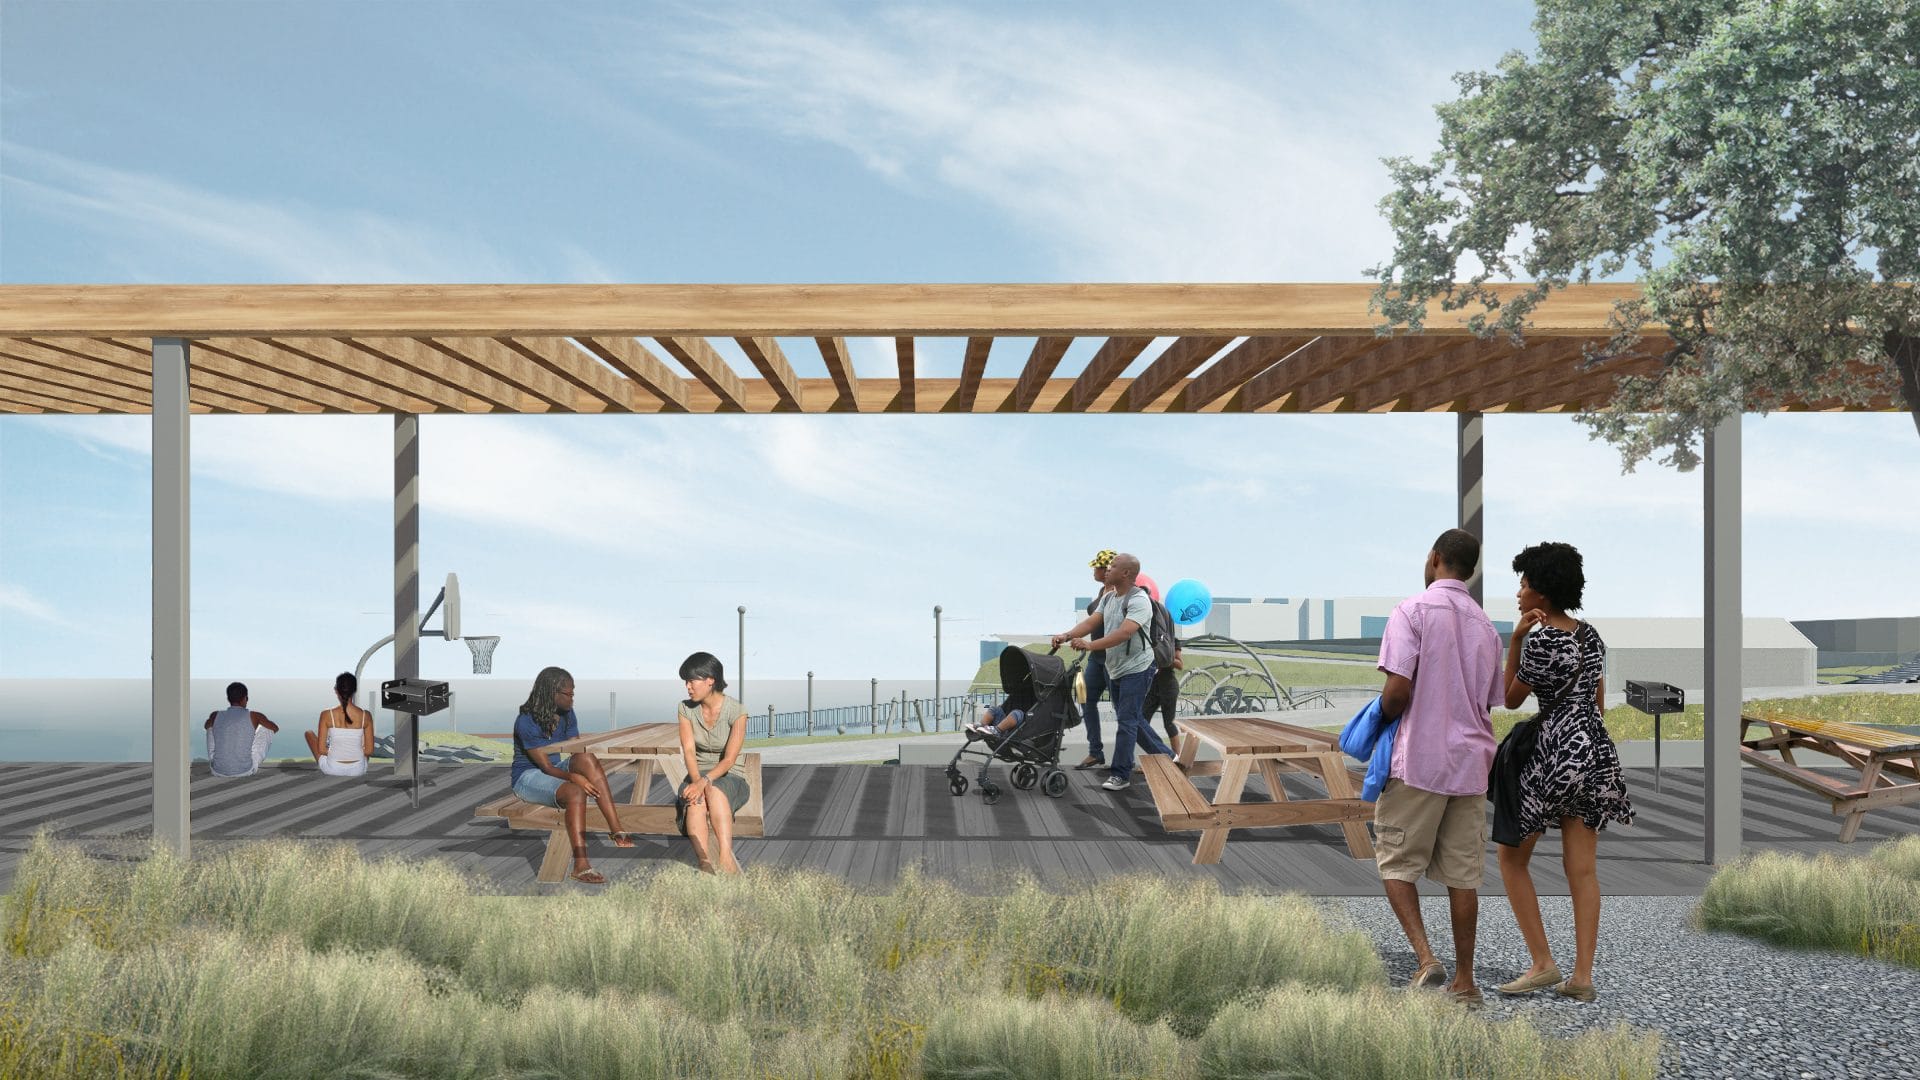 An artist's rendering of a park with benches and picnic tables.